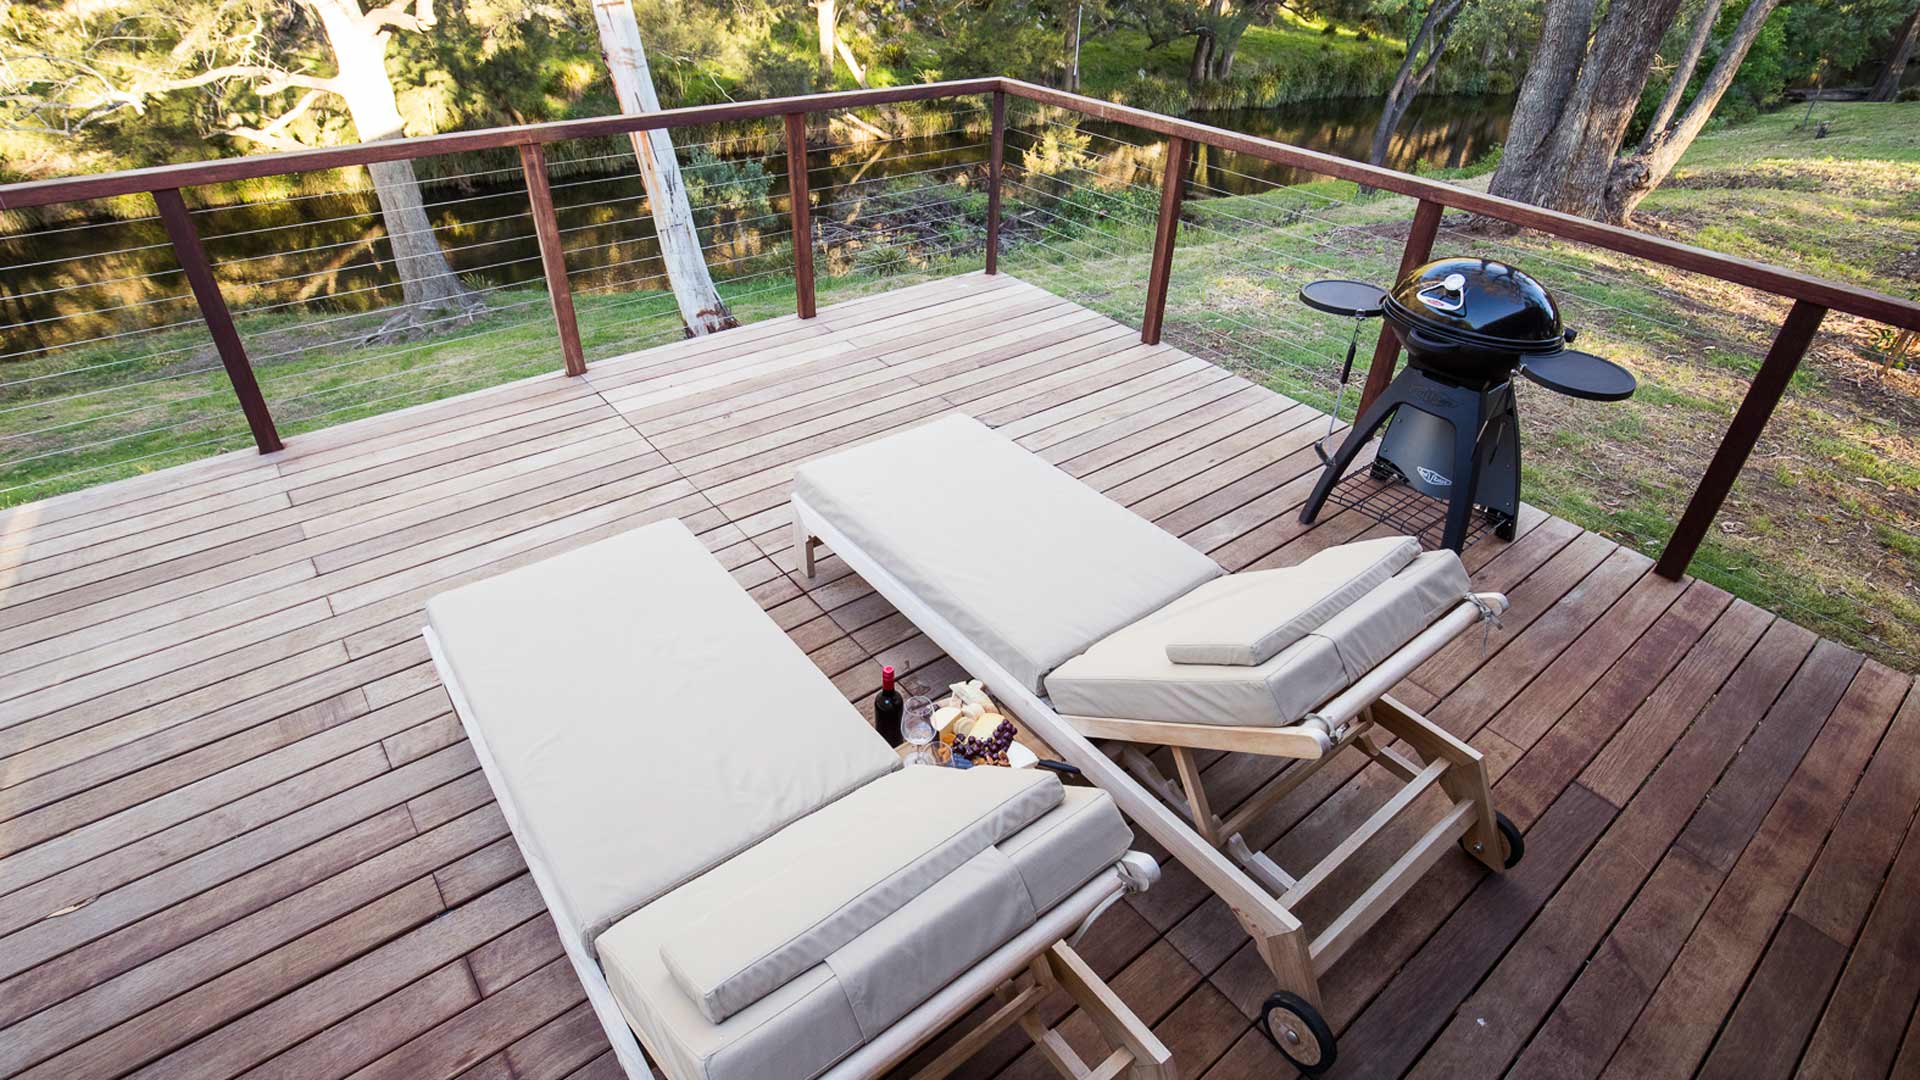 This Glamping Retreat Near the Blue Mountains Is Your New Reason to Get Out of the City